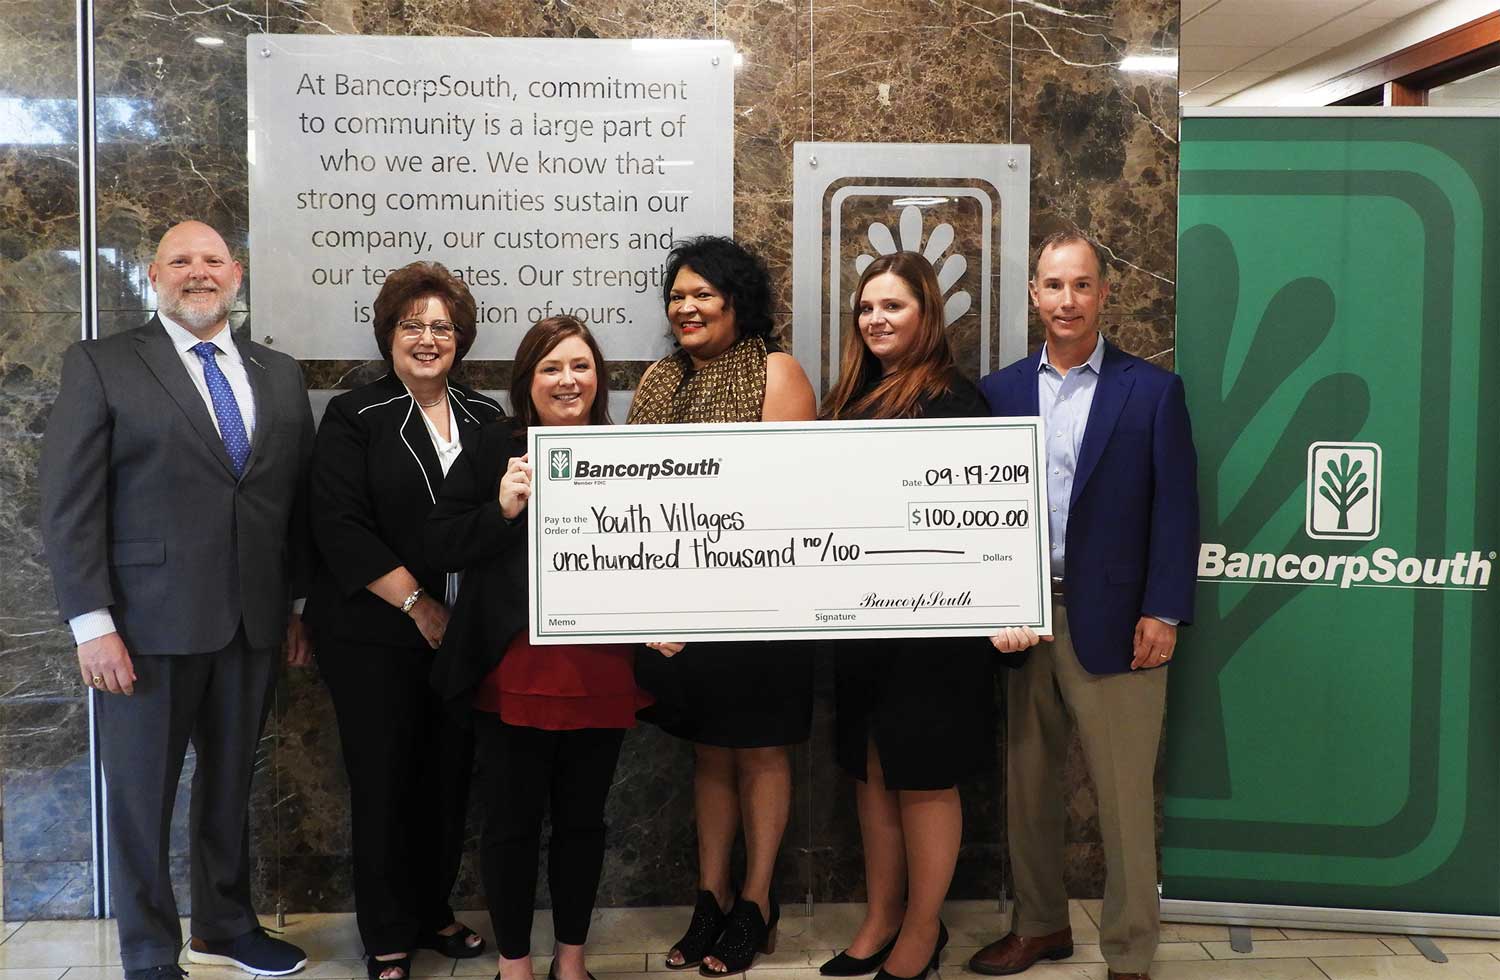 BancorpSouth contributes $100,000 to Youth Villages